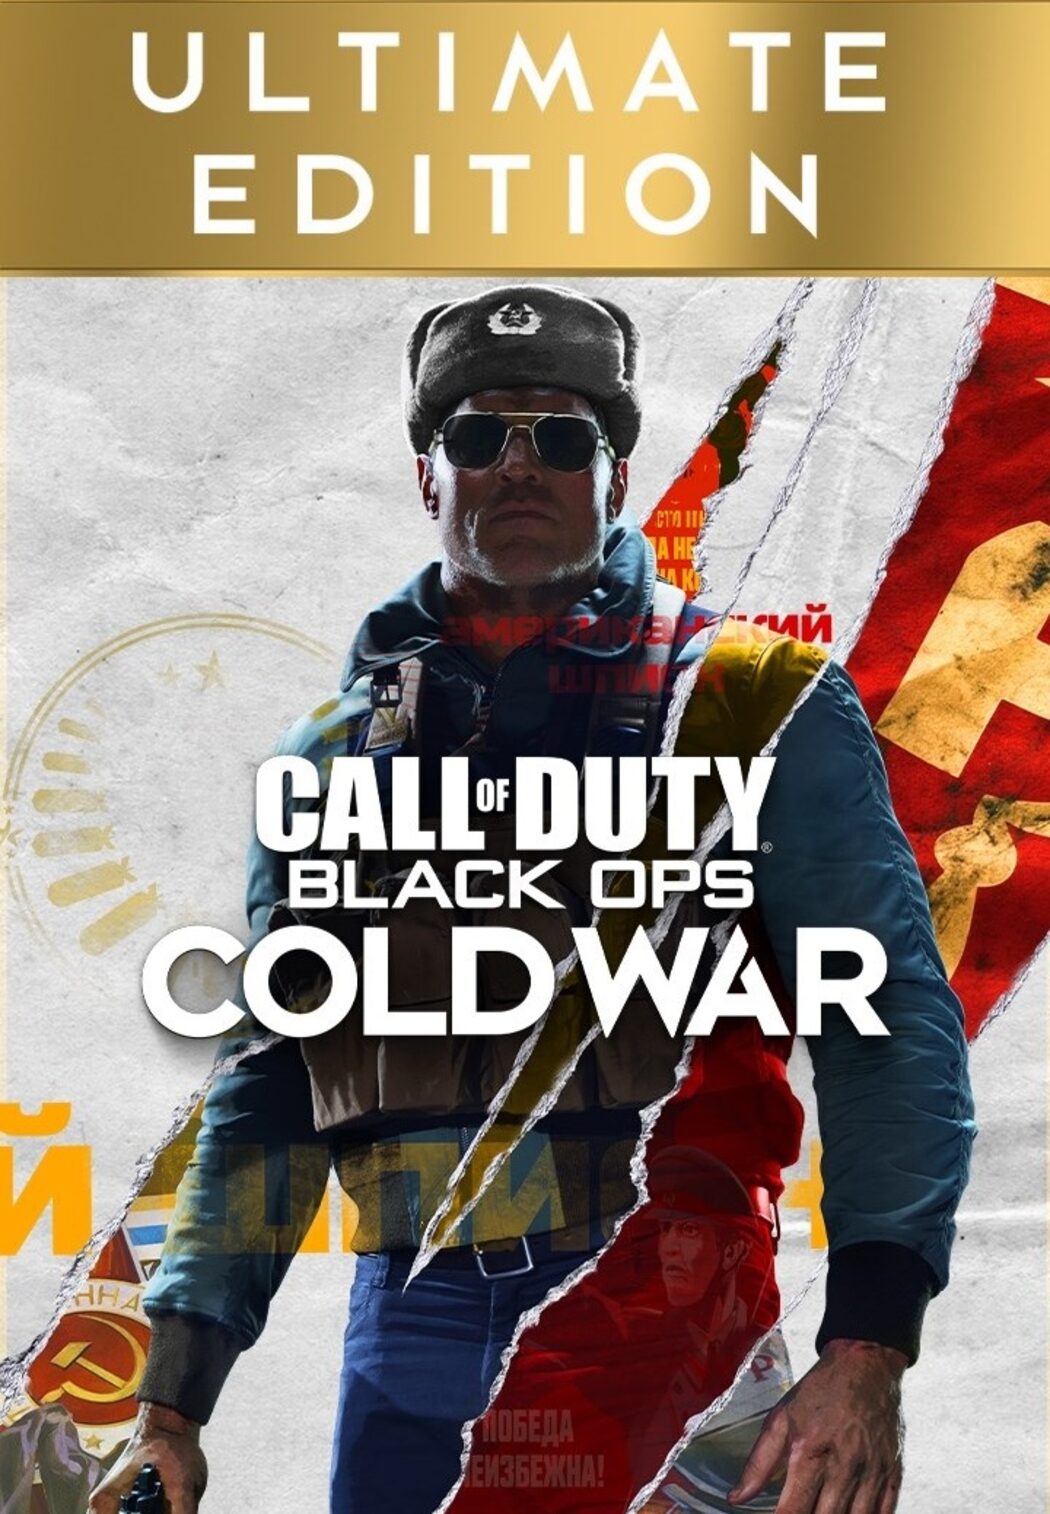 call of duty black ops cold war ultimate edition key